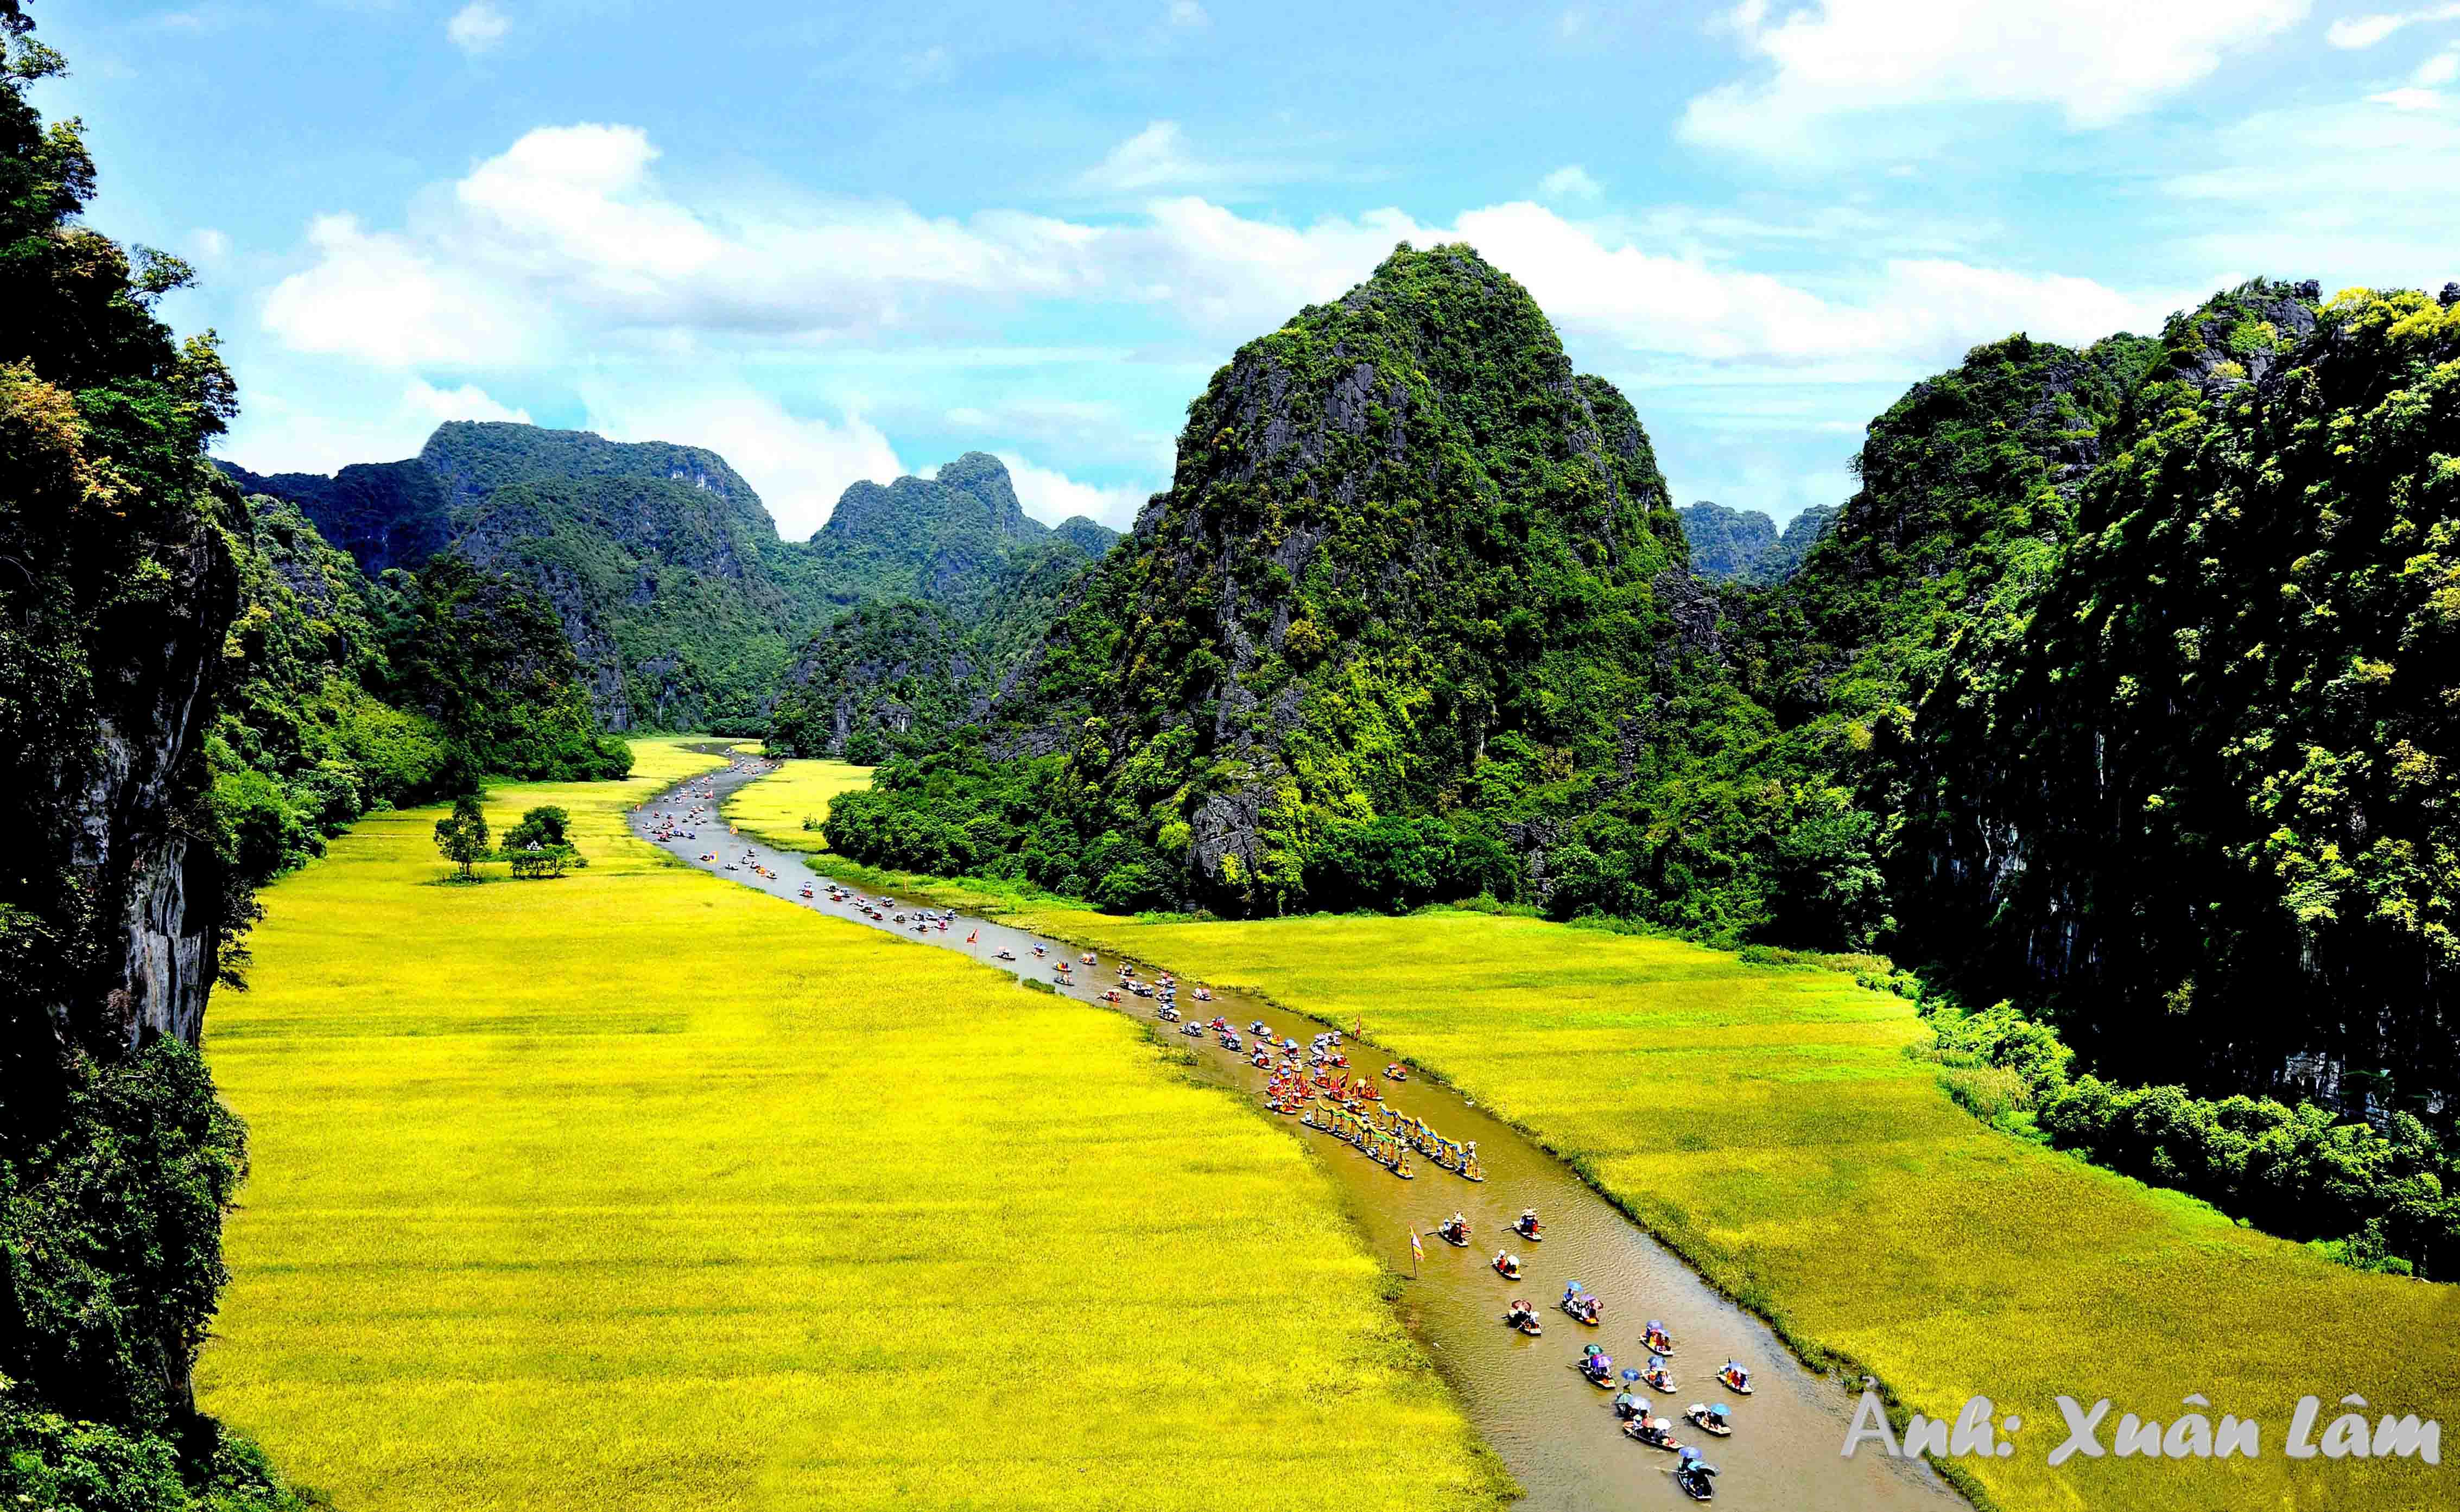 TAM COC – BICH DONG – THE PHAT DIEM CATHEDRAL (01 DAY)